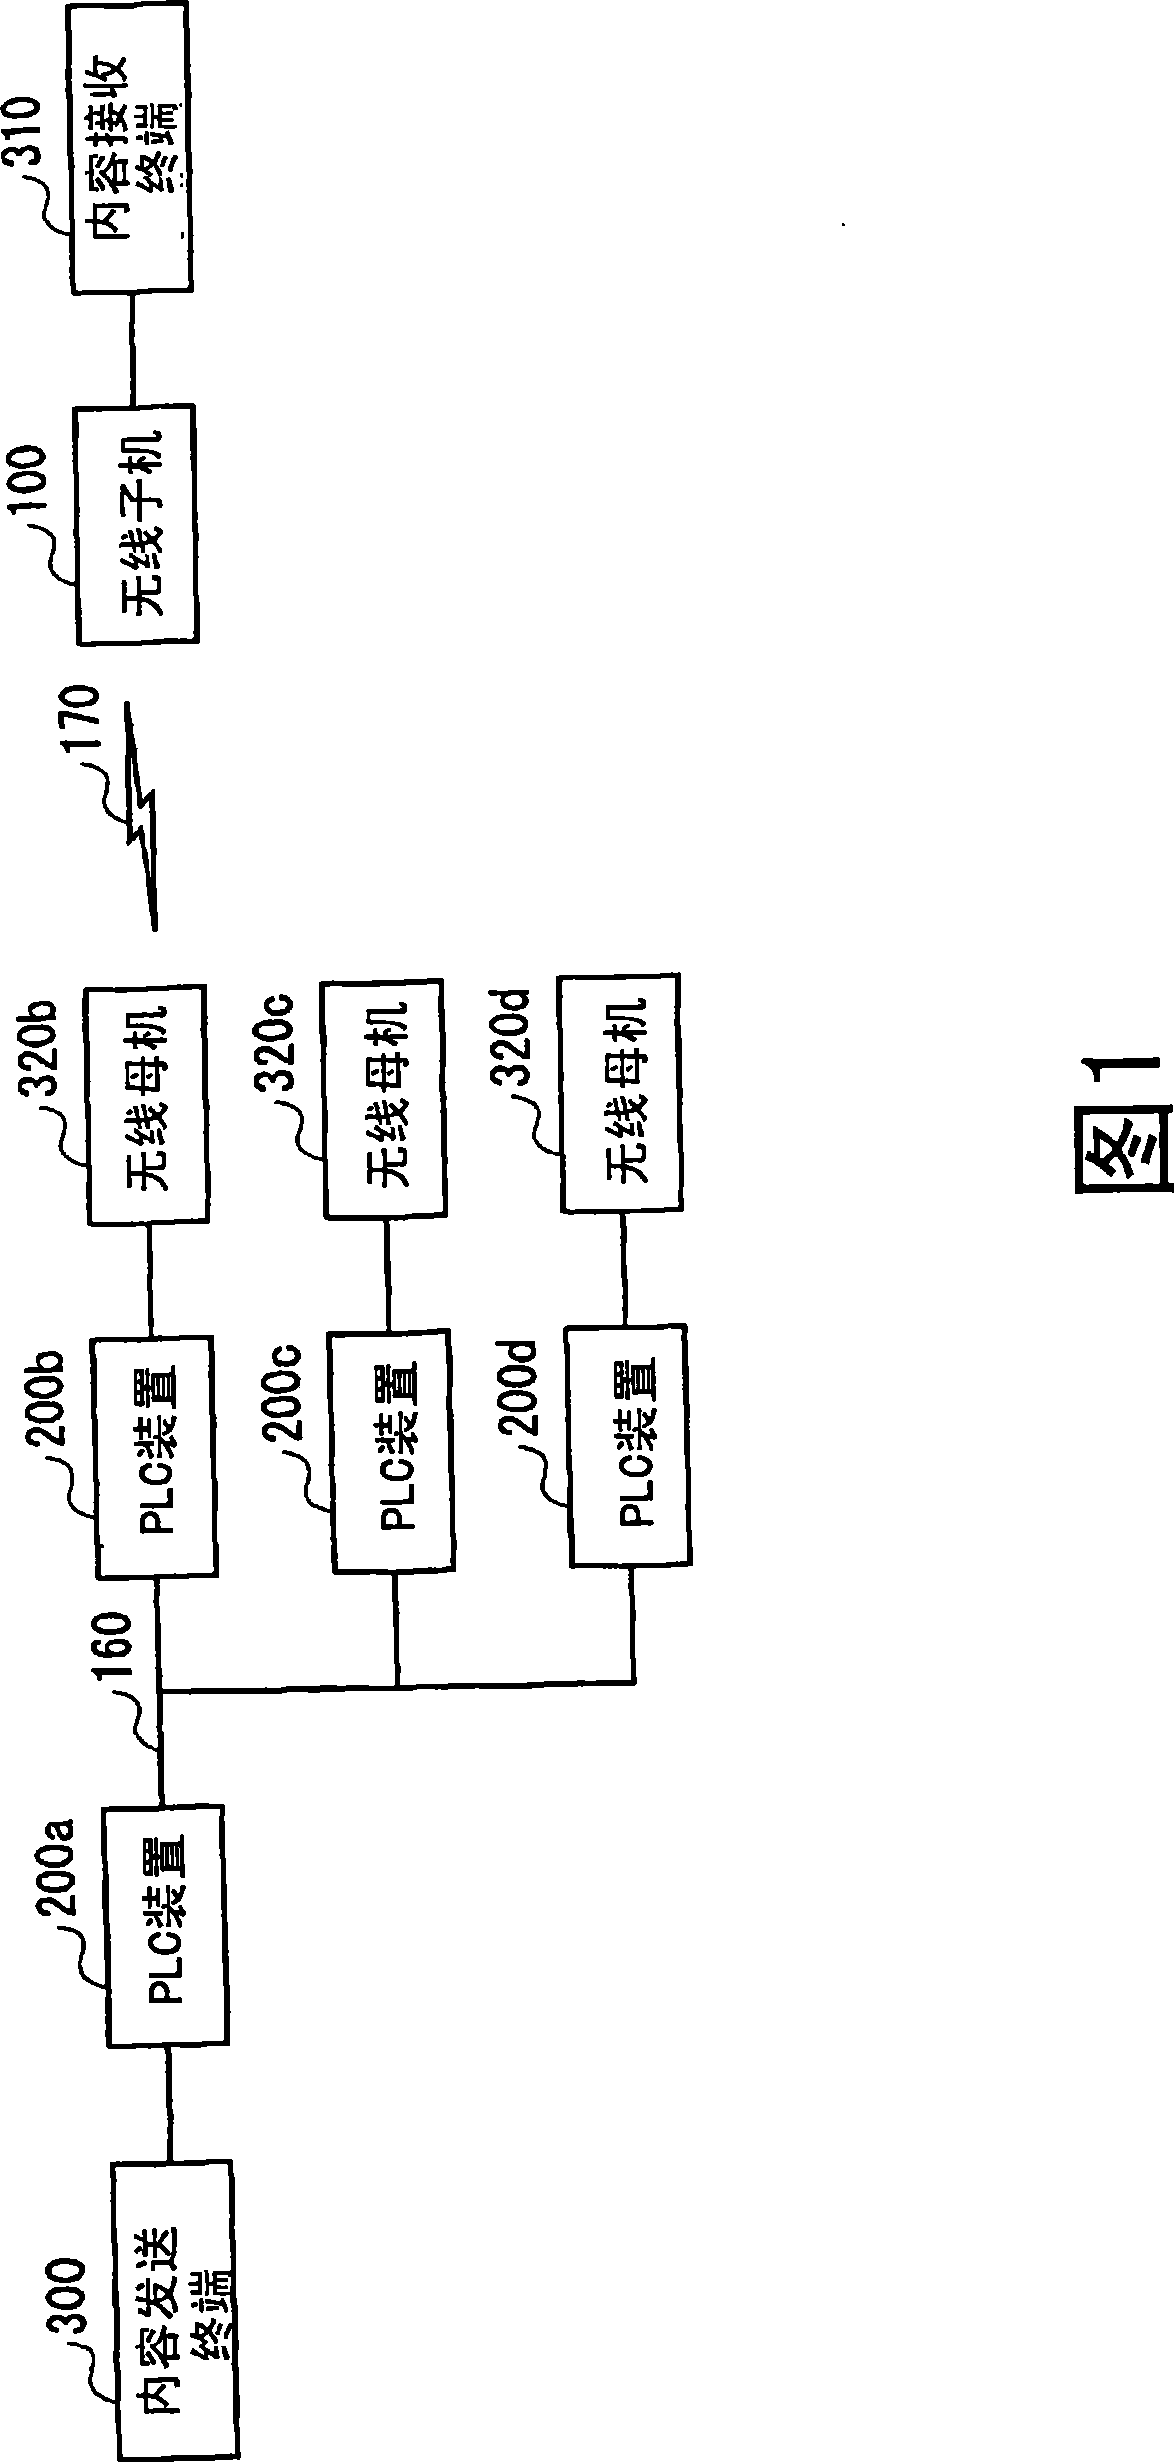 Radio communication device, frequency band setting system